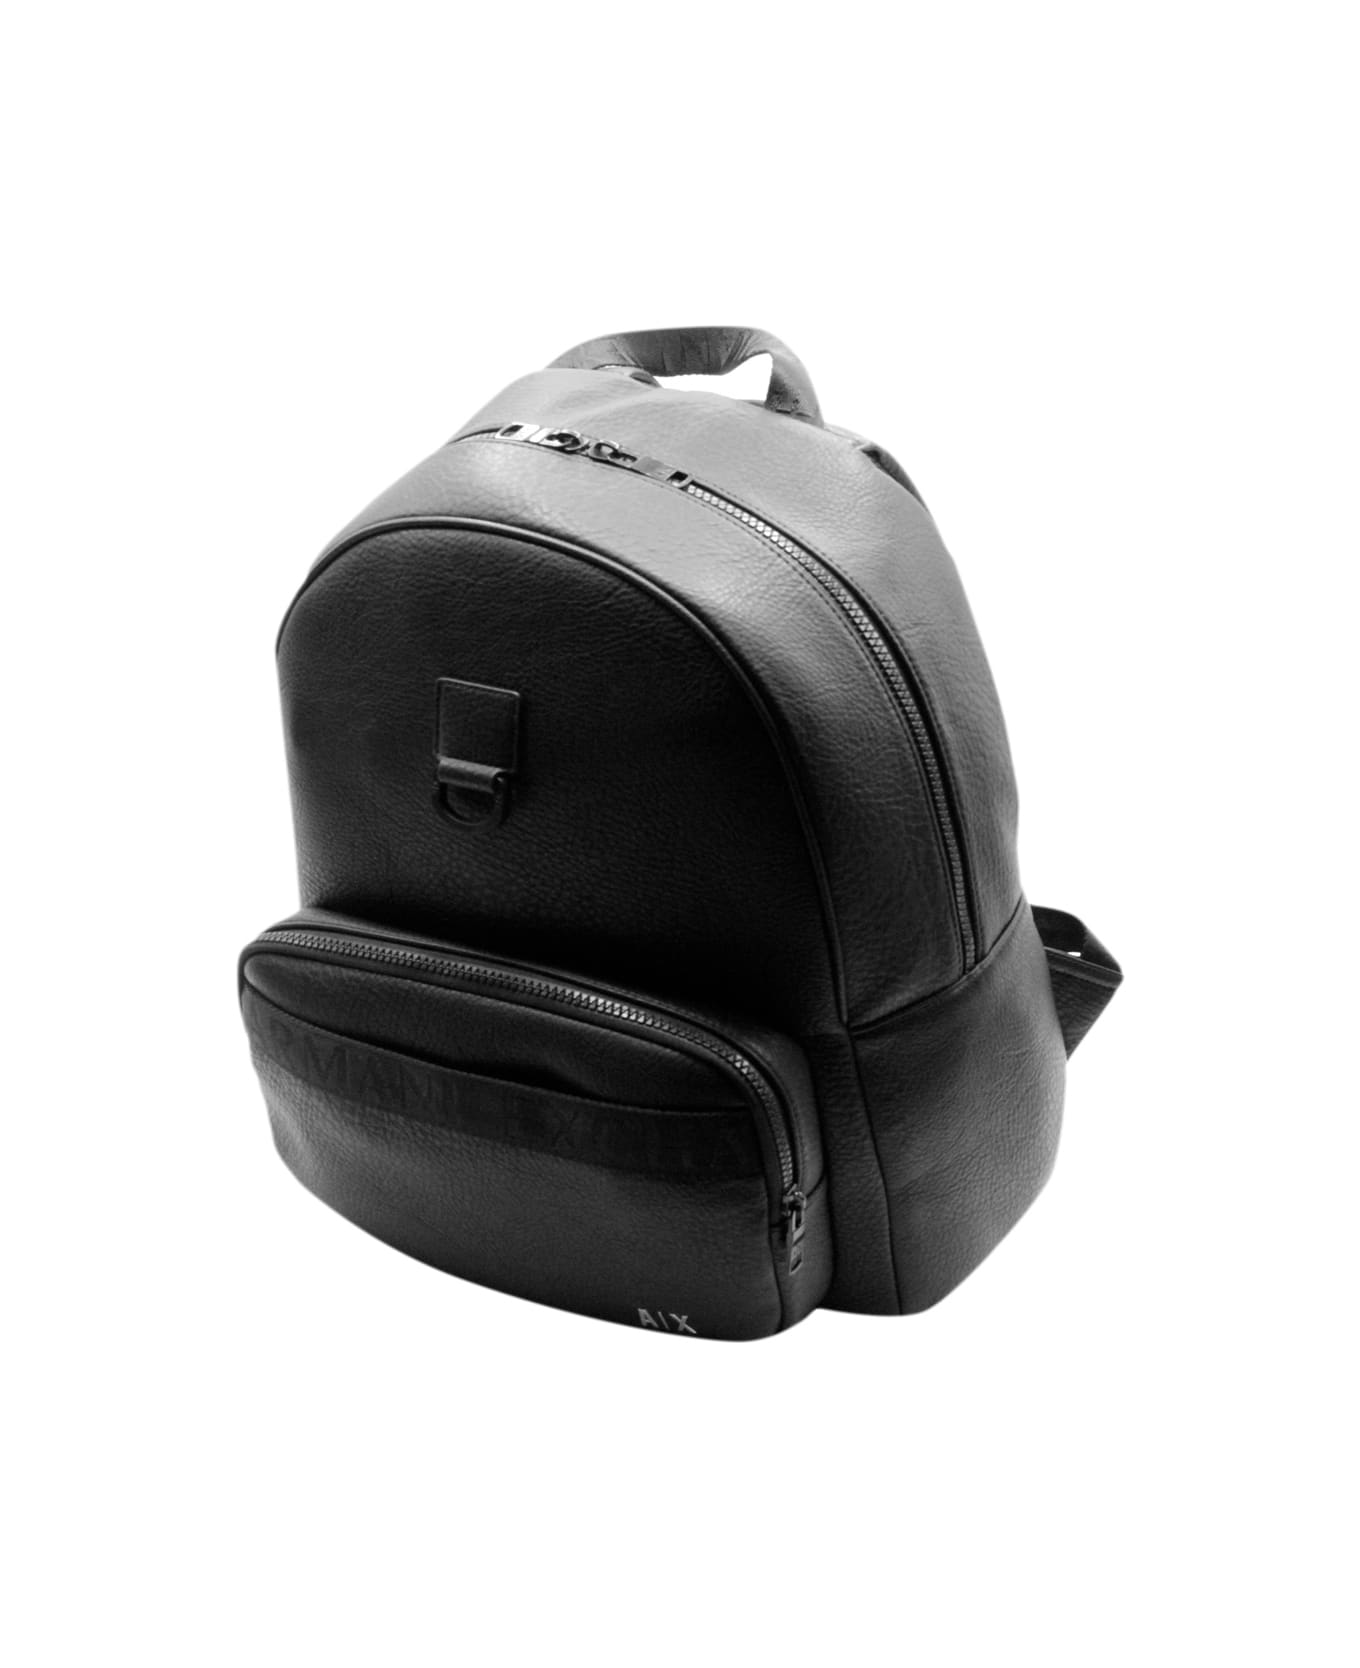 Armani Collezioni Backpack In Very Soft Soft Grain Eco-leather With Logo Written On The Front. Adjustable Shoulder Straps. Measures 38x32x12 Cm - Black バックパック